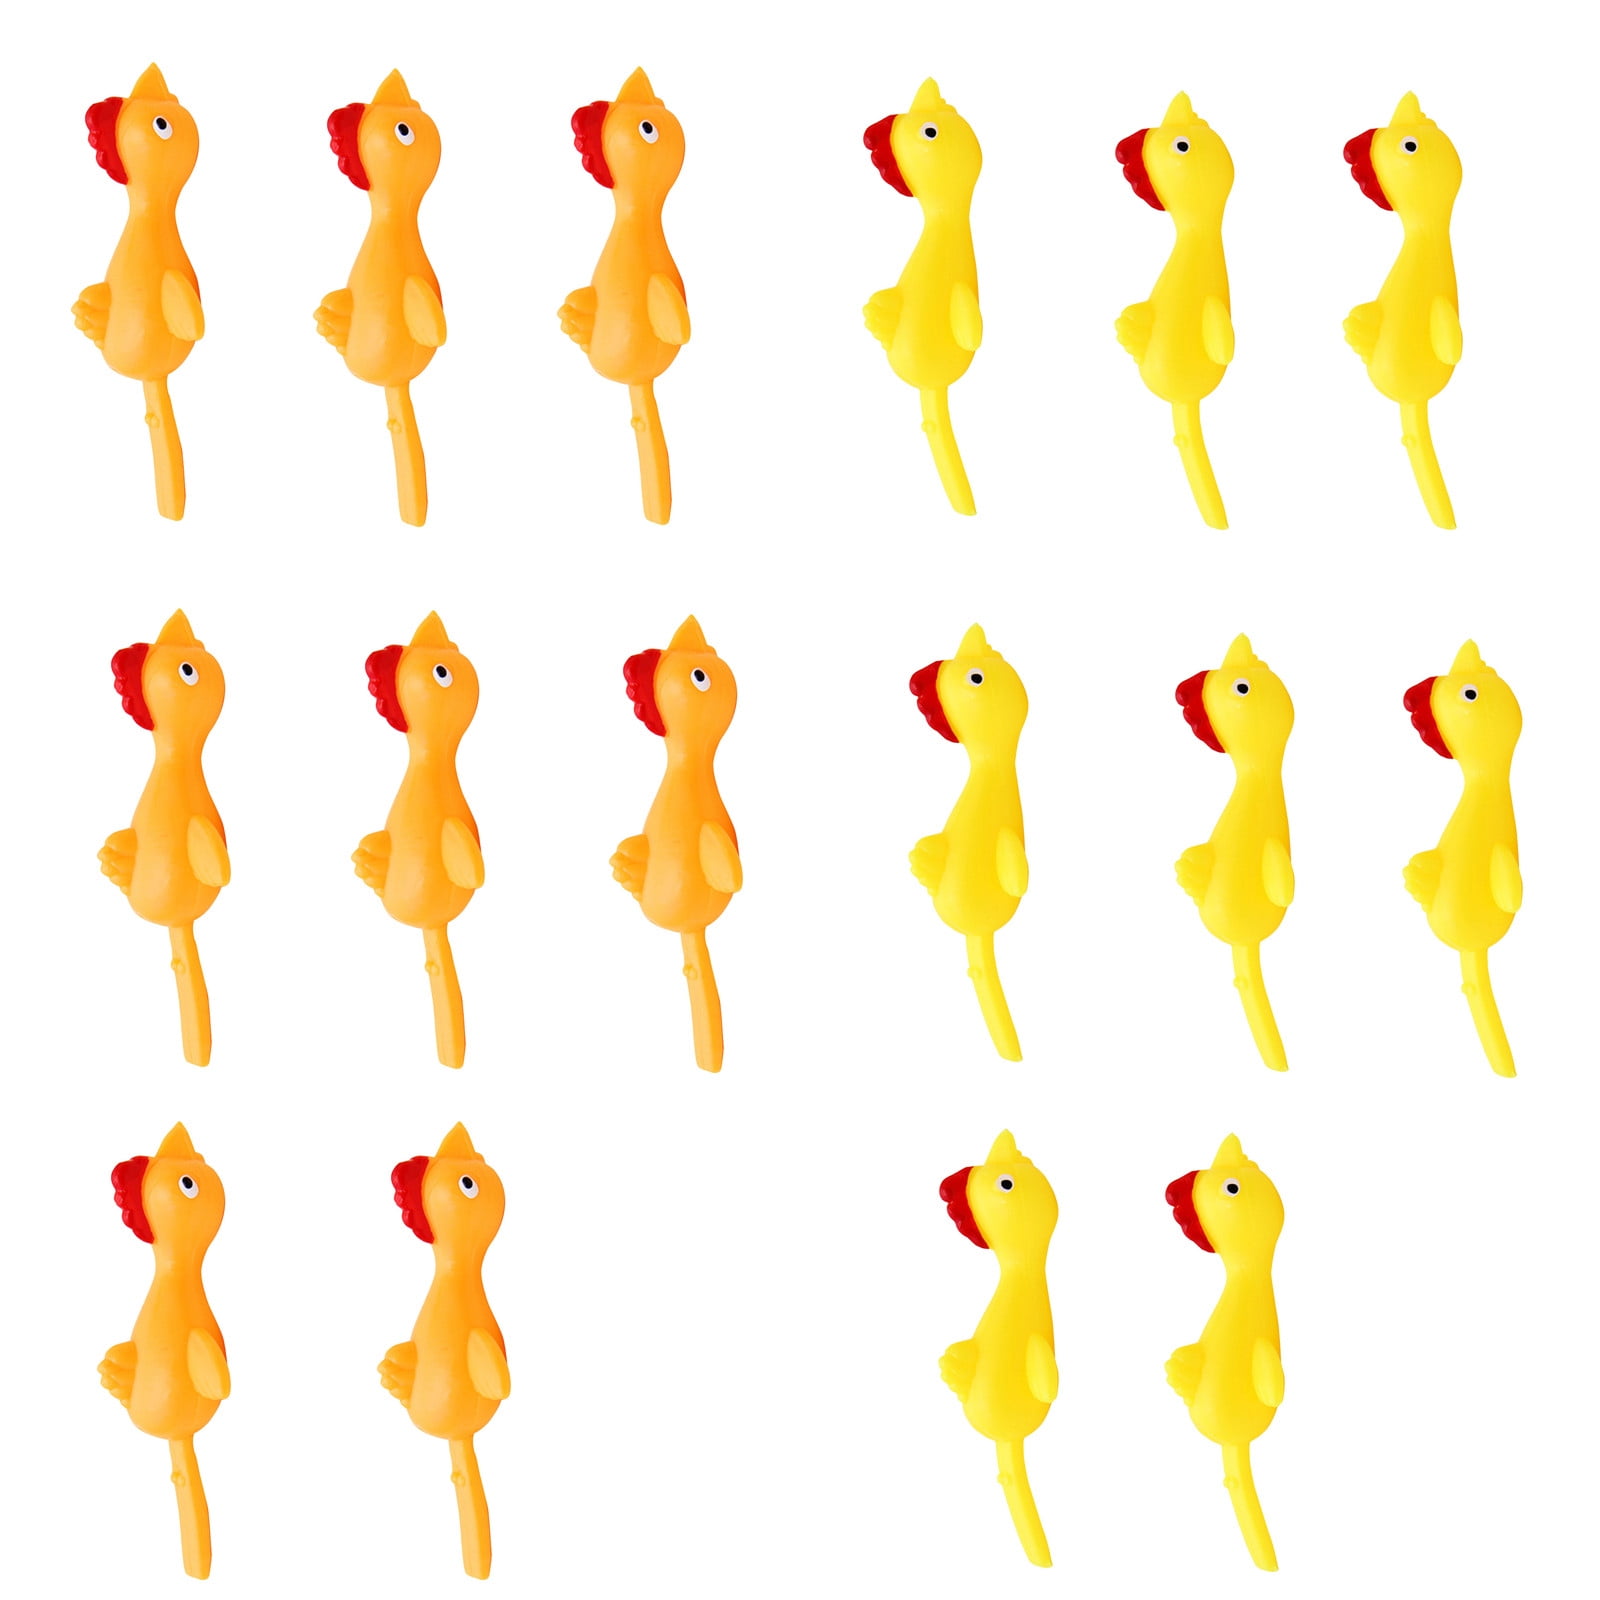 4PCS=2Orange+2Yellow Ejection Chicken Toy Light Rubber Stretch Slingshot Finger Flying Toy Creative Prank Game to Relieve Stress for Children Adults Men Women 